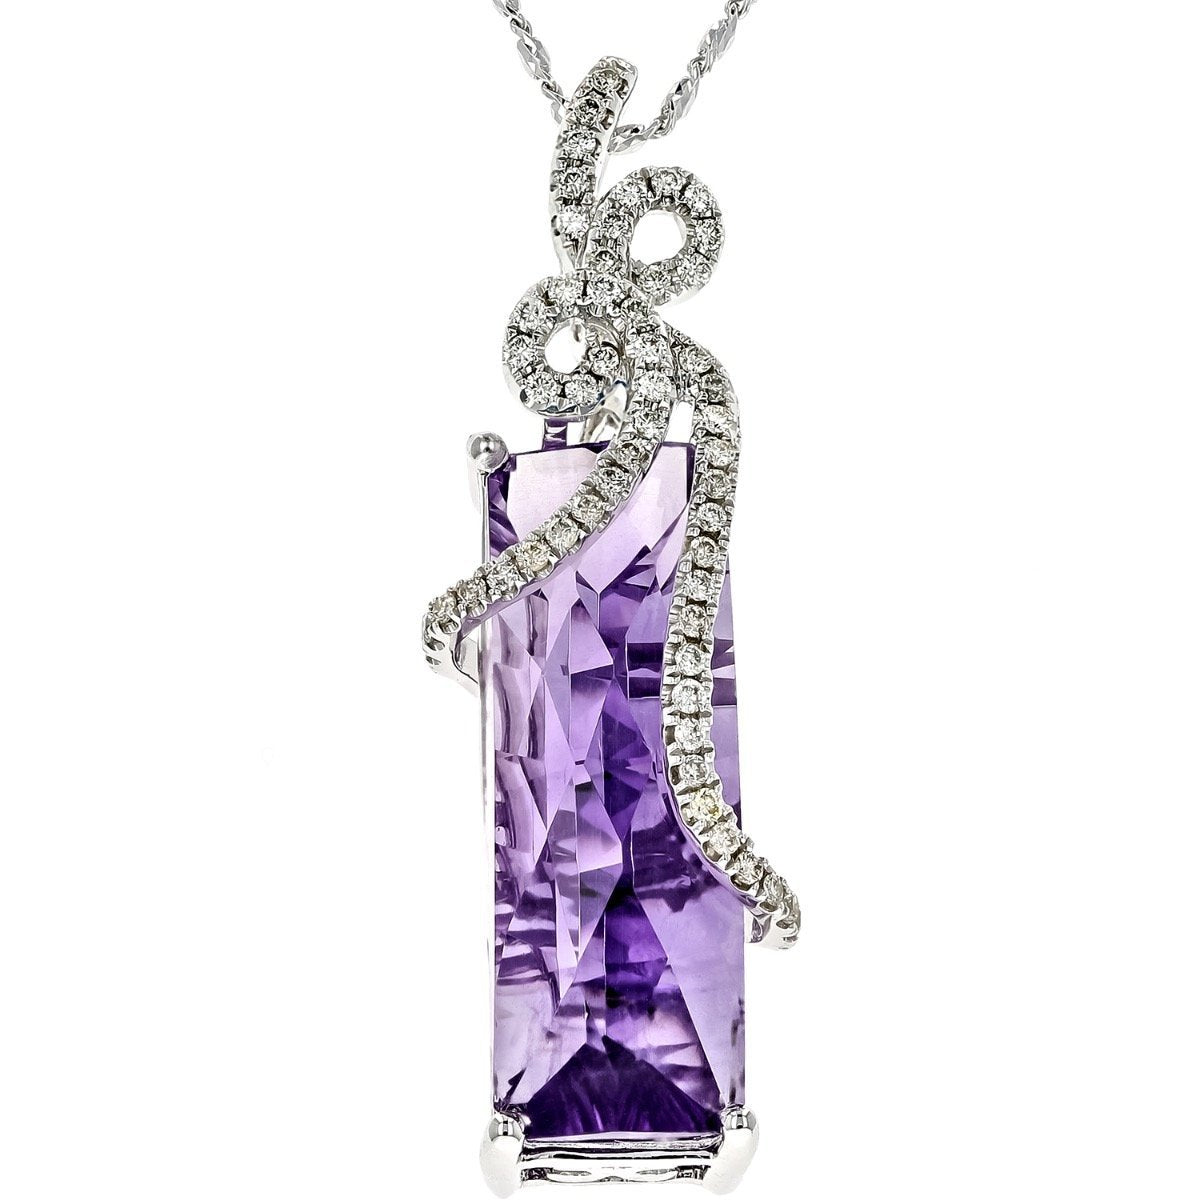 14KT WHITE GOLD EMERALD CUT AMETHYST AND DIAMOND NECKLACE